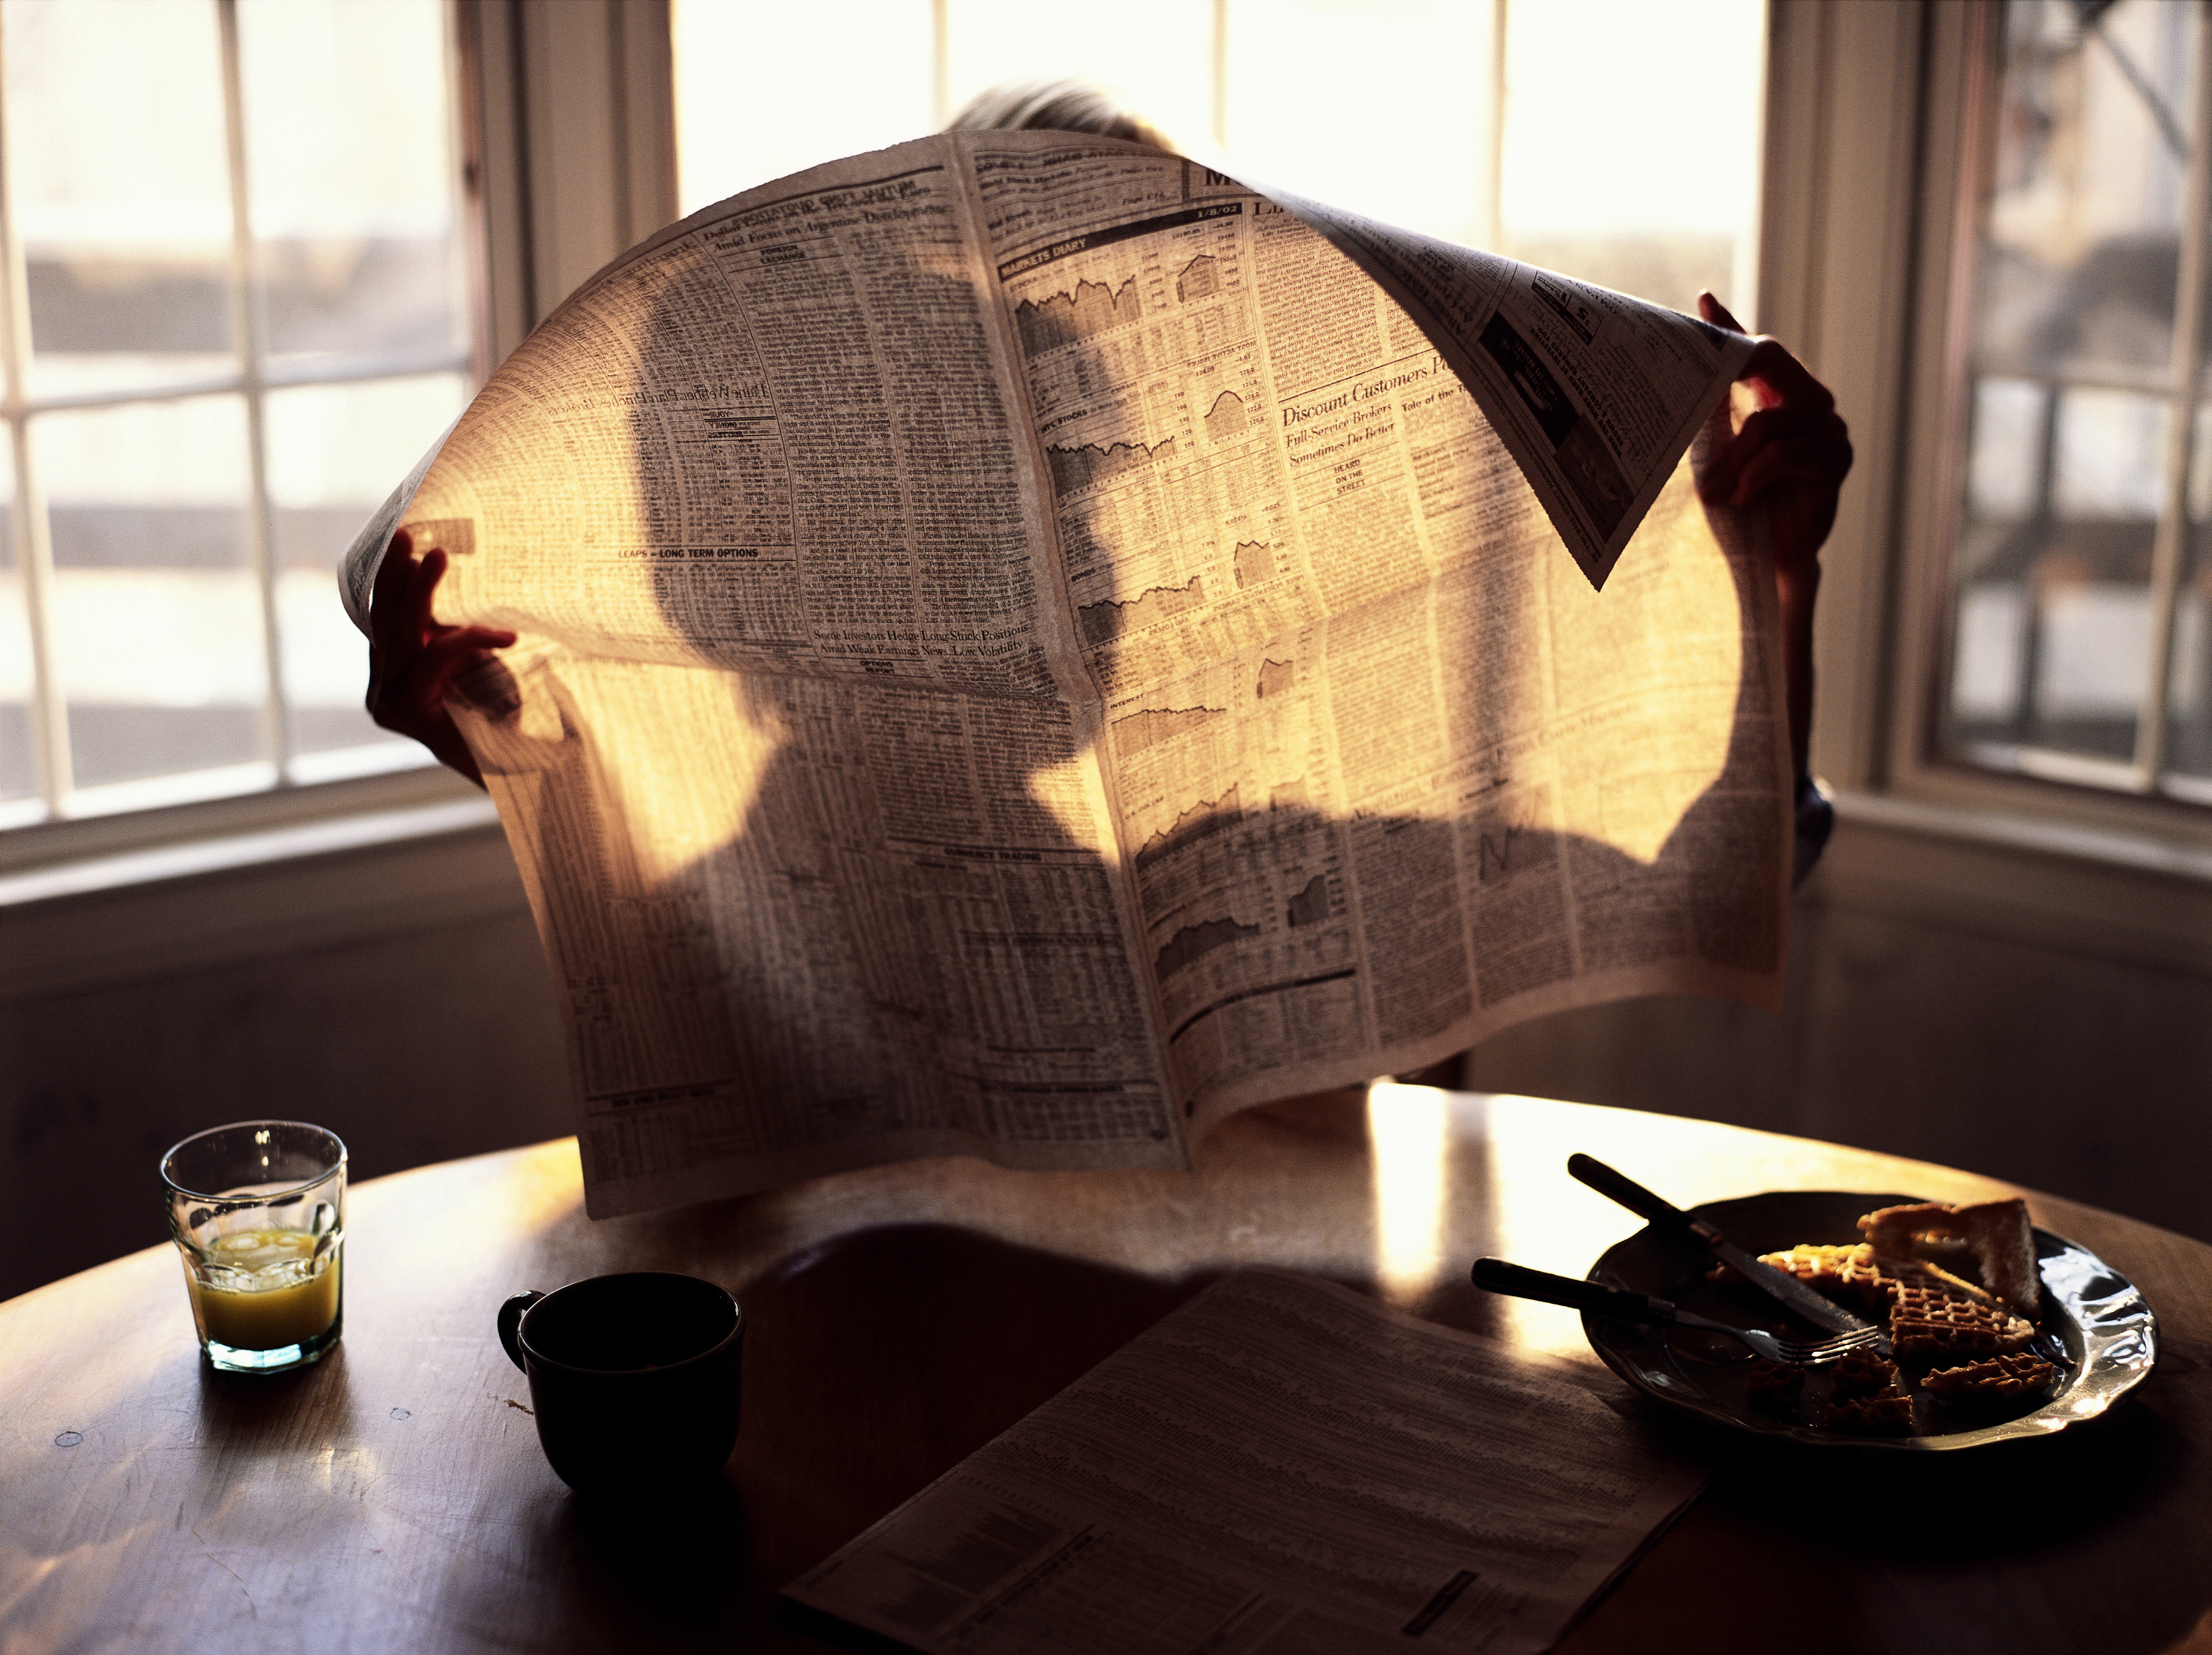 Silhouette of someone reading the newspaper, through the paper. Sunny